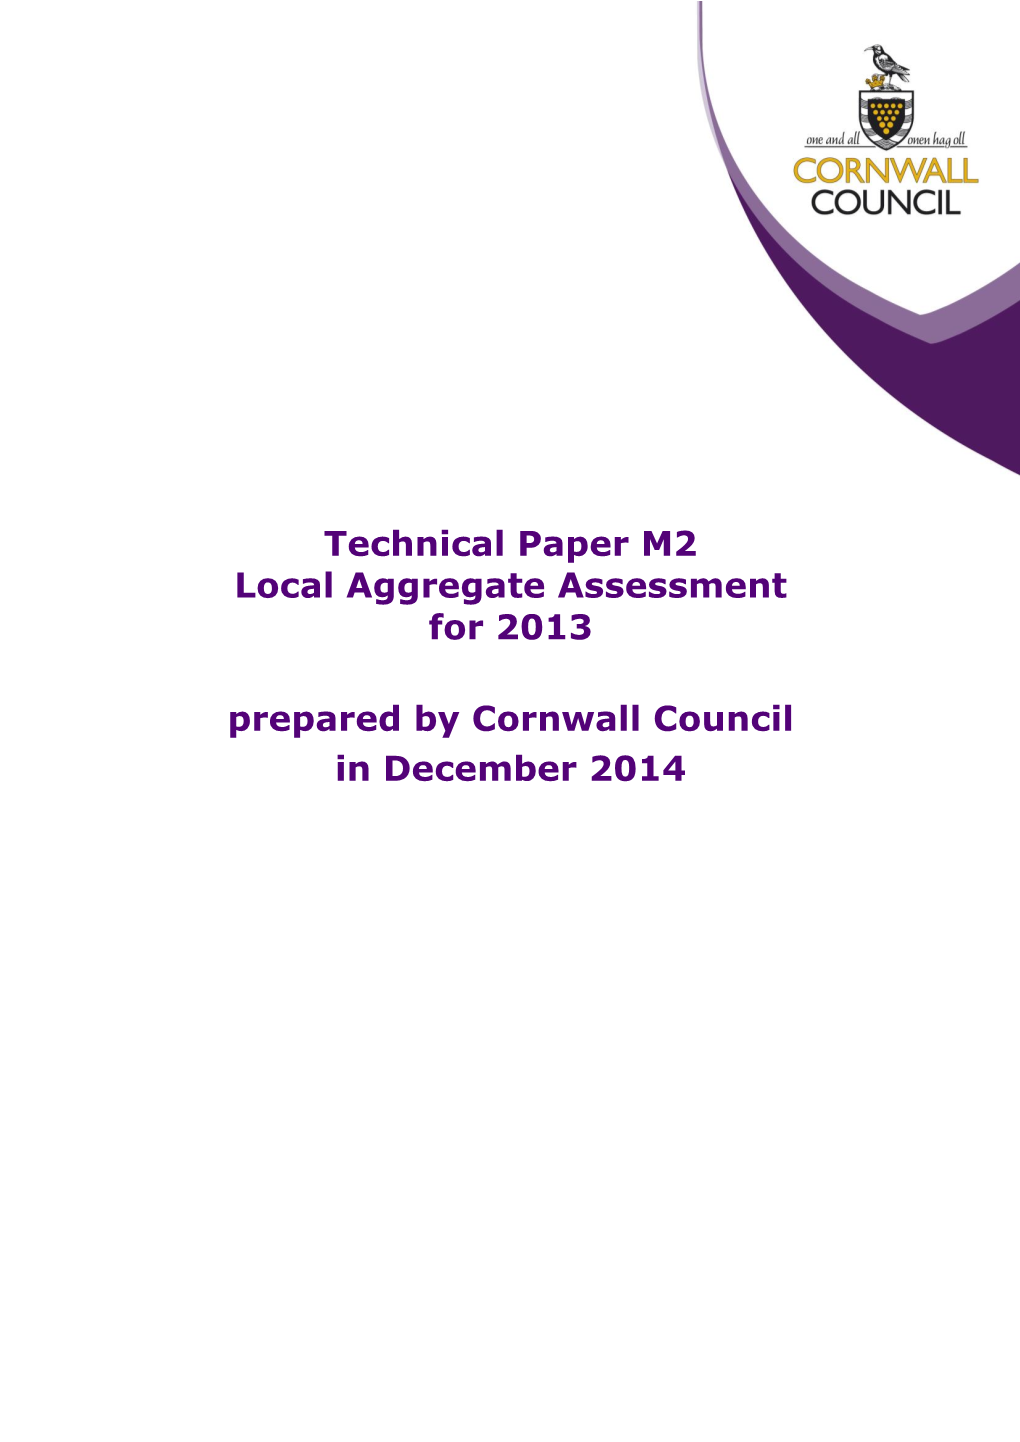 Technical Paper M2 Local Aggregate Assessment for 2013 Prepared by Cornwall Council in December 2014